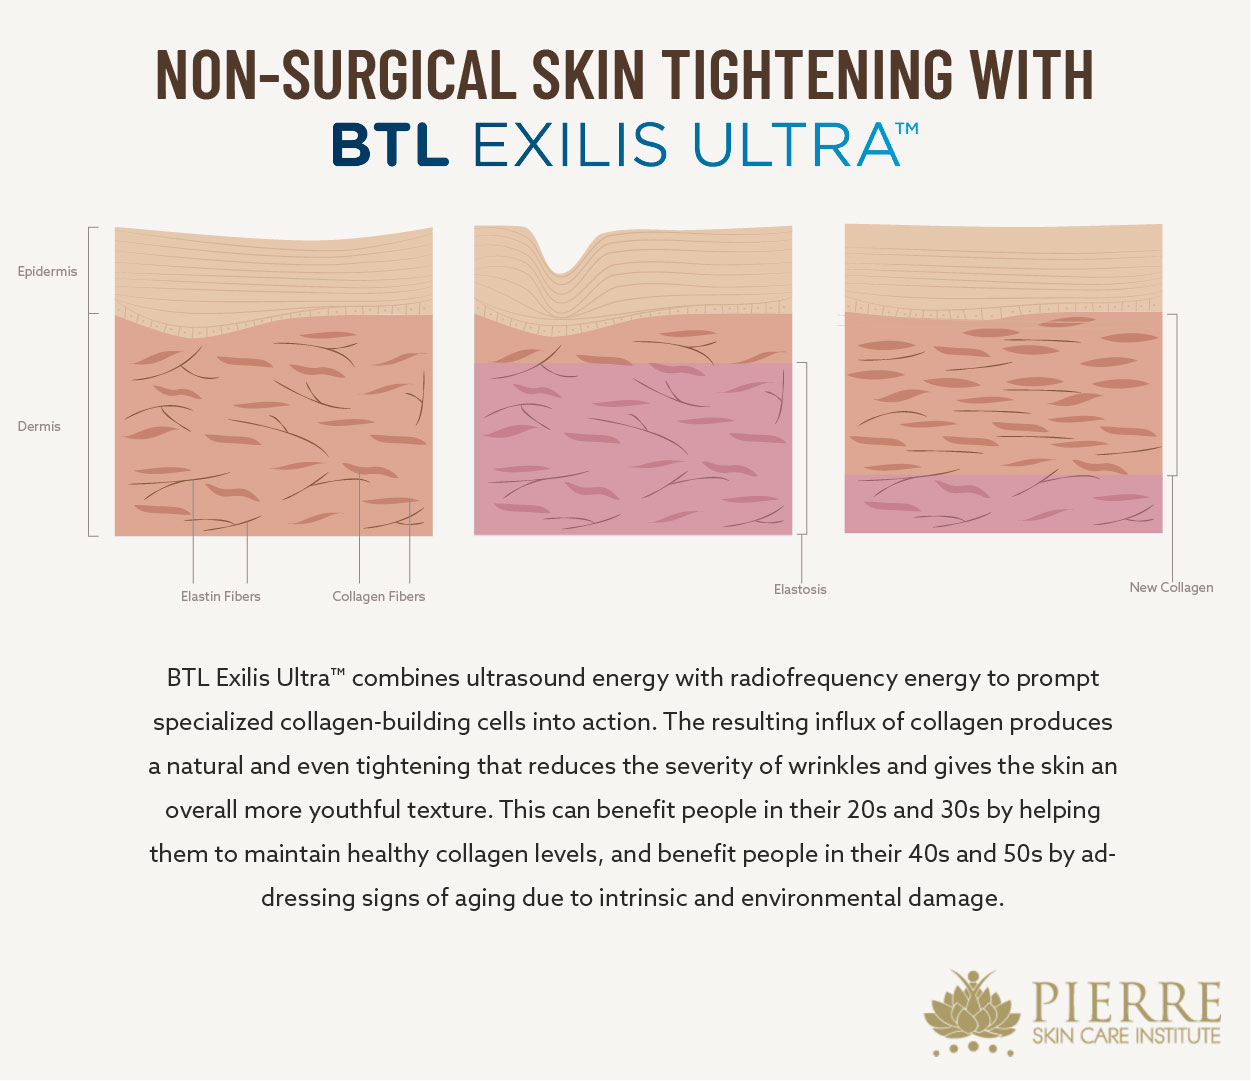 Discover the dual-energy-powered benefits of BTL Exilis Ultra™ for noninvasive skin tightening at Thousand Oaks' Pierre Skin Care Institute.